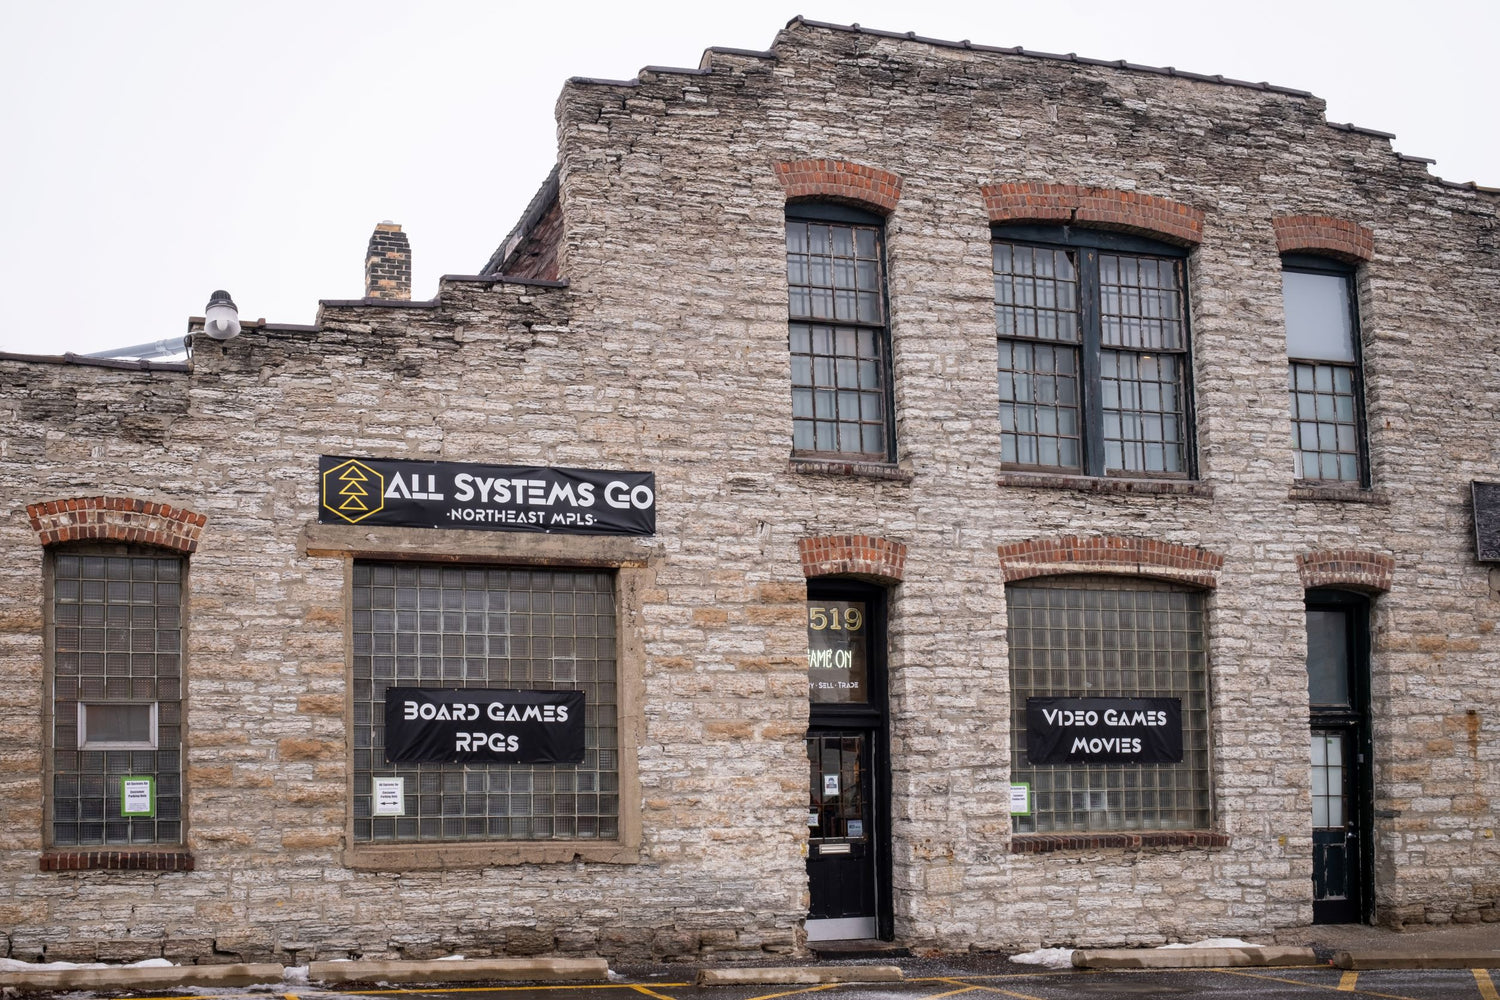 Image shows the front of the All Systems Go storefront in northeast Minneapolis. The building is brick and has 3 banners on it; reading the store name and the various items sold there.